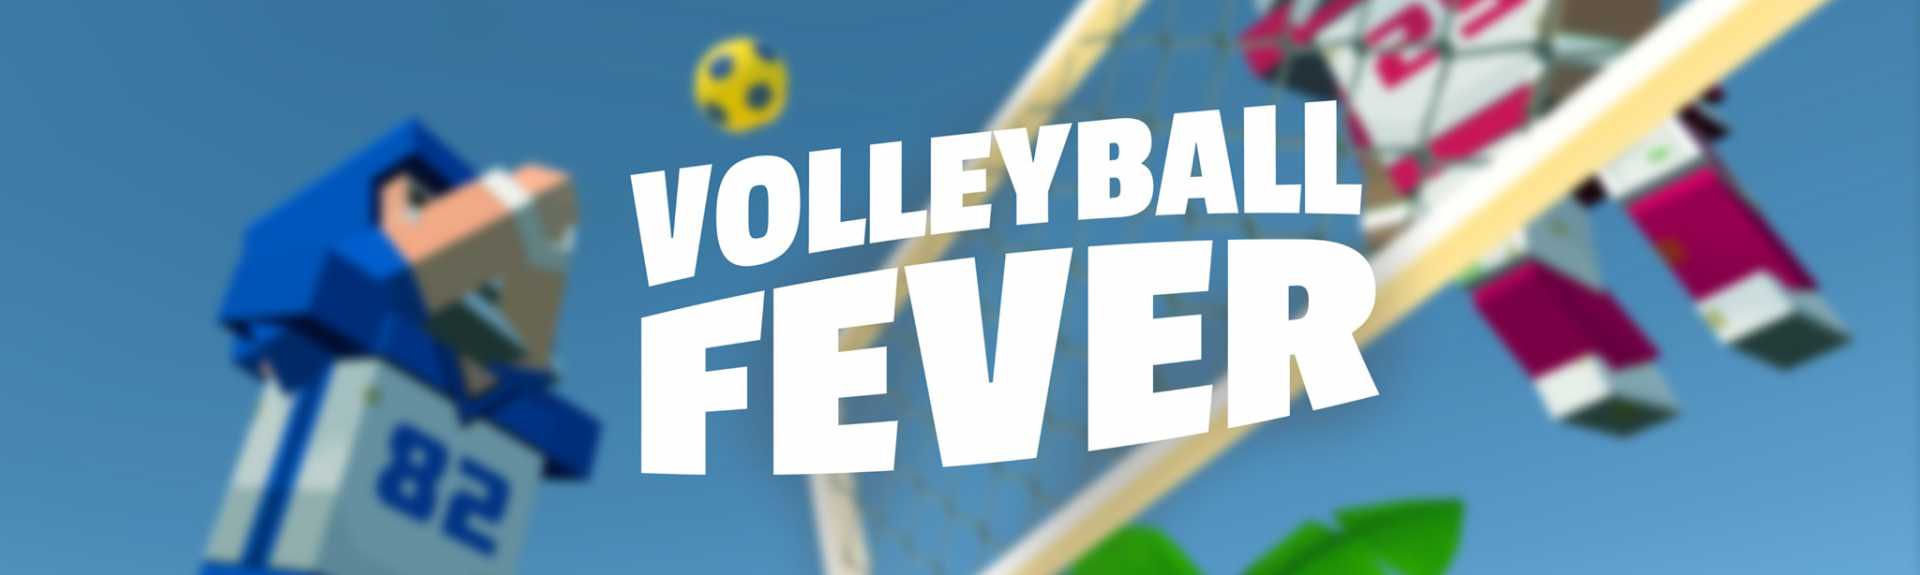 Volleyball Fever